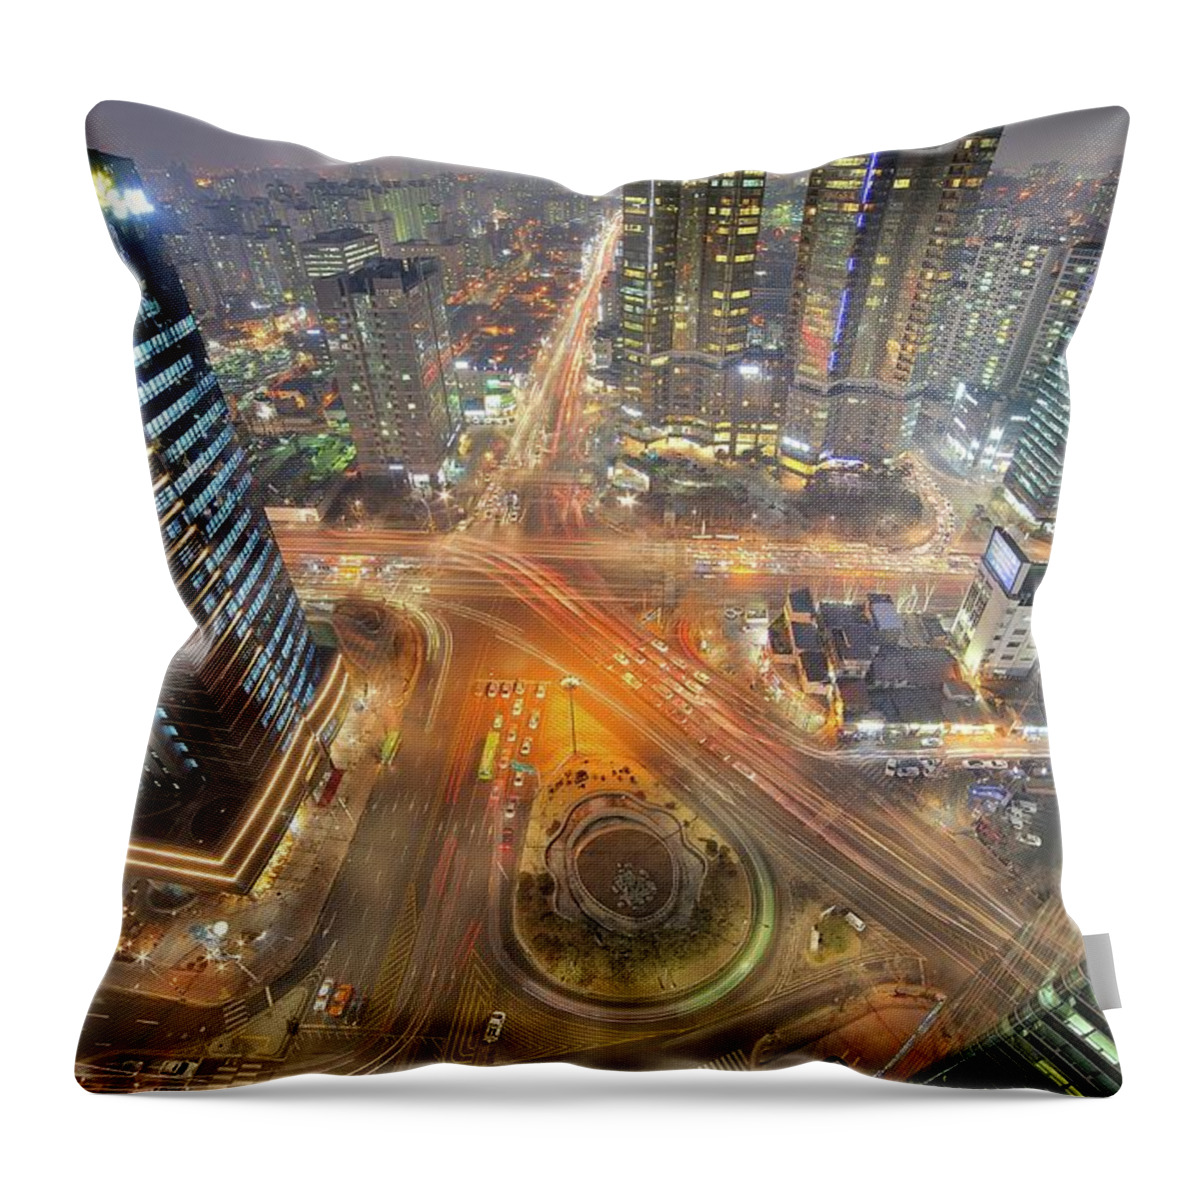 Seoul Throw Pillow featuring the photograph Night View Of Gongdeok, Mapo-gu, Seoul by Tokism